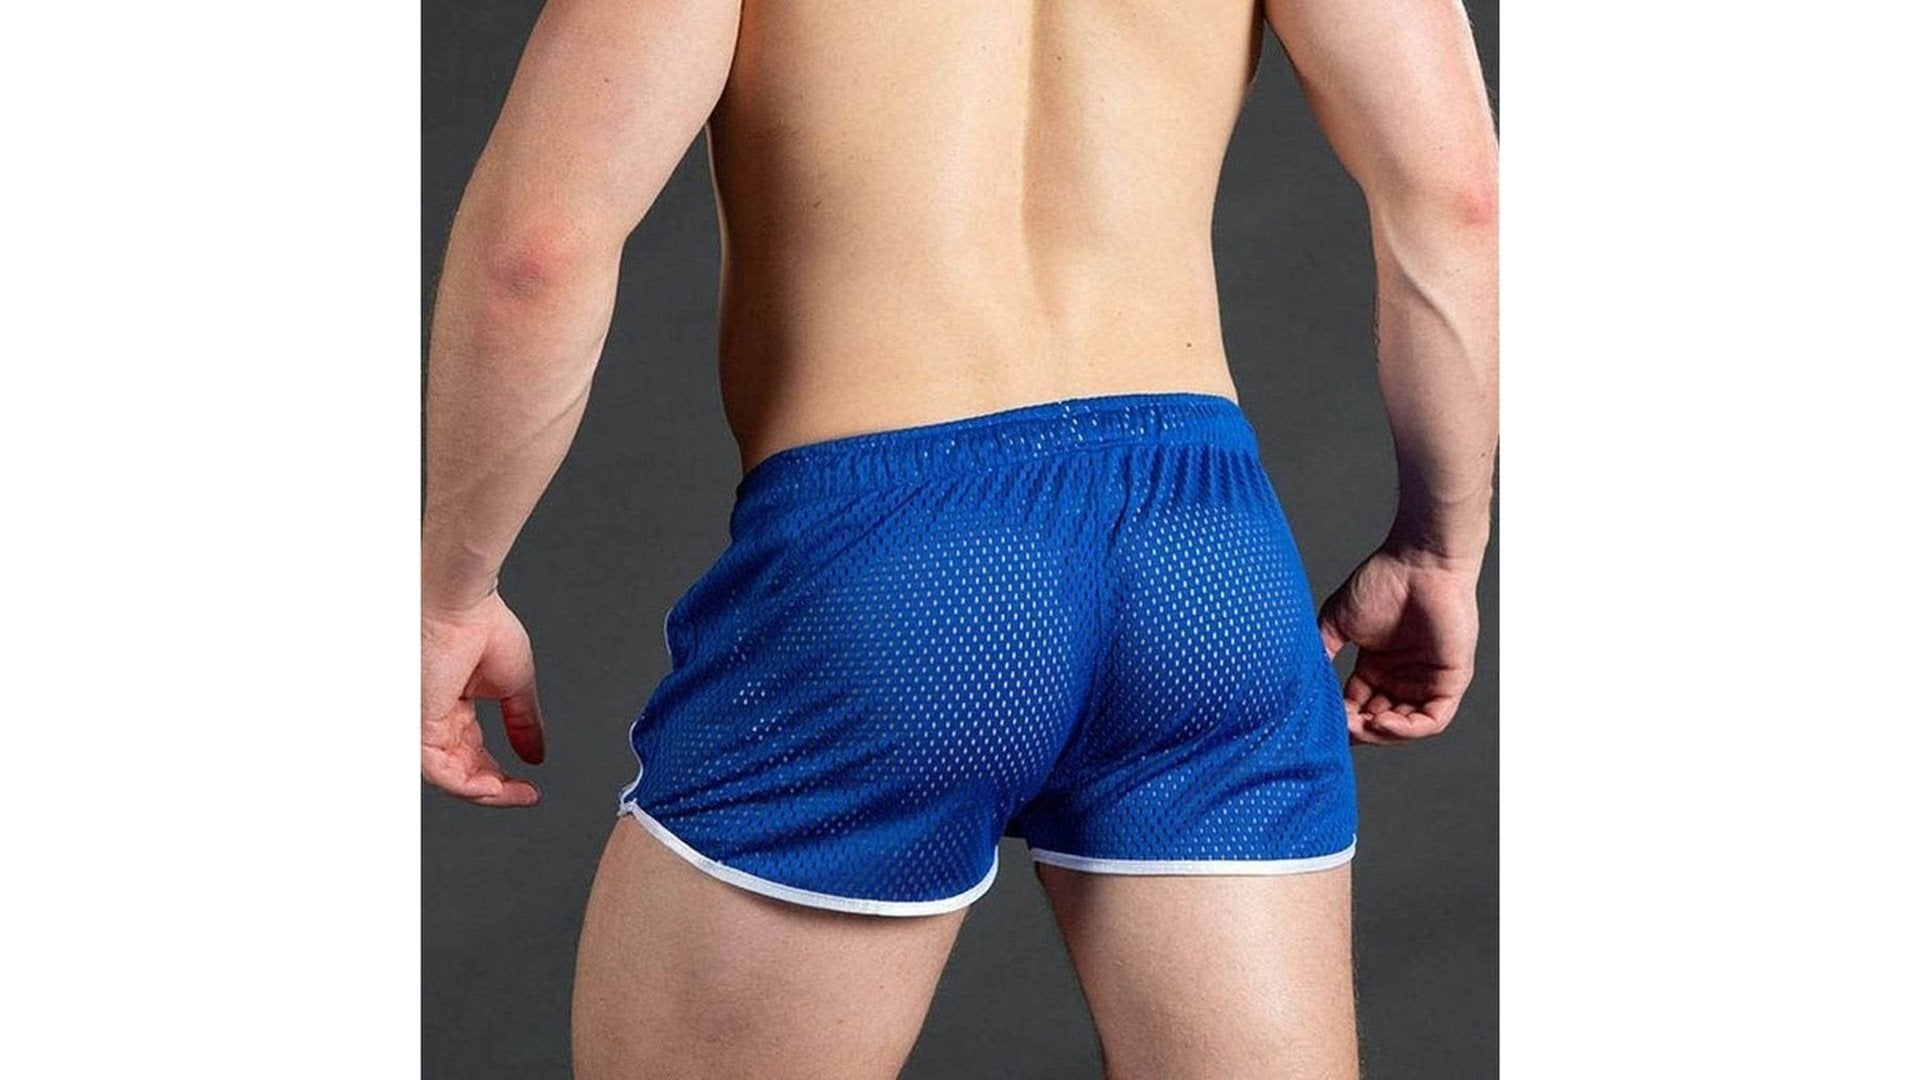 5 Reasons Why Not Wearing Underwear with Mesh Shorts is All the Rage